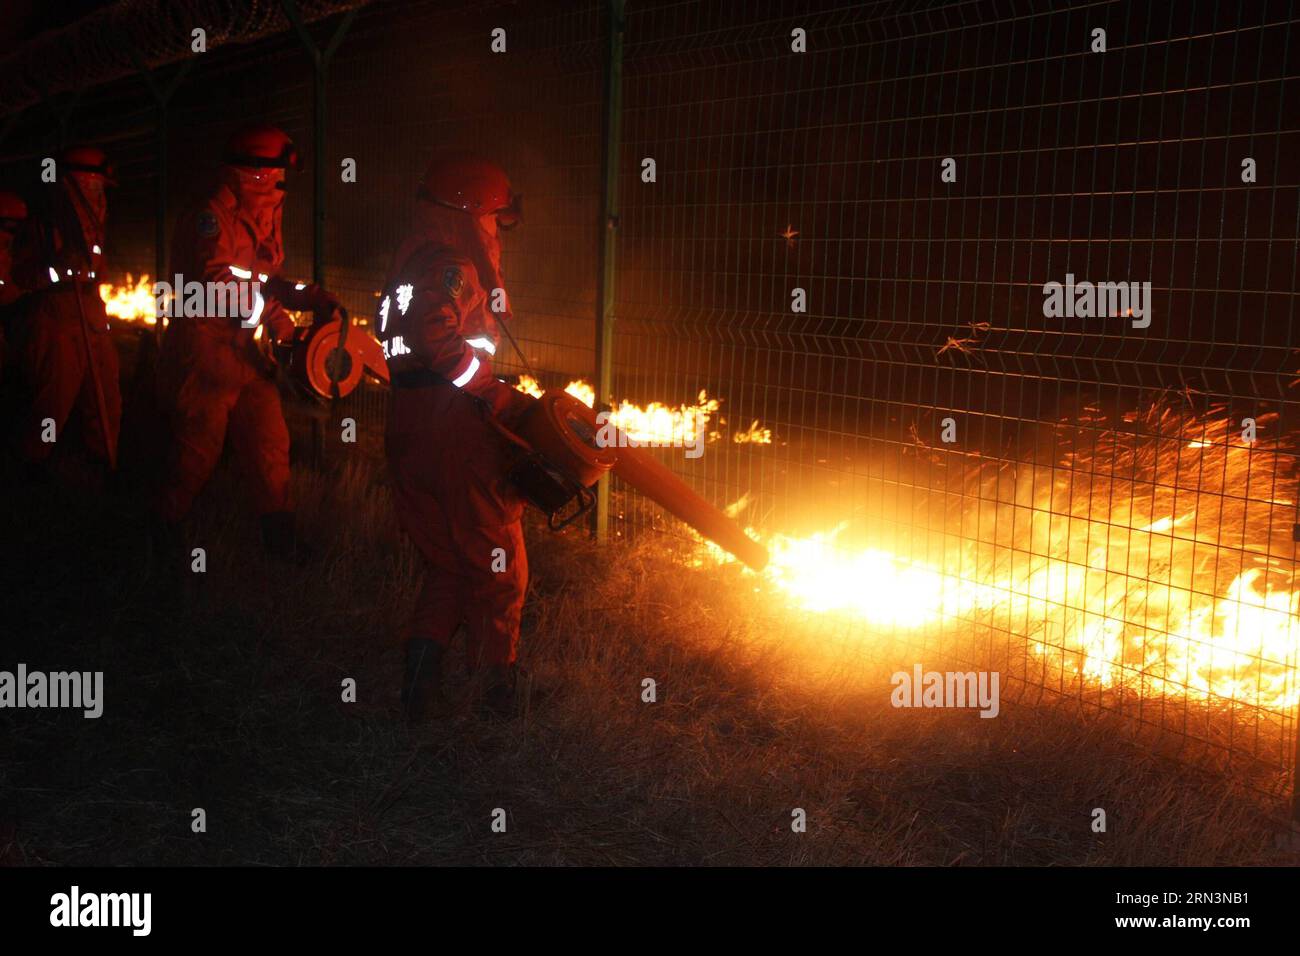 MANZHOULI, April 22, 2015 () -- Firefighters try to extinguish fire approaching the border of China and Russia in Manzhouli City, north China s Inner Mongolia Autonomous Region, April 22, 2015. A fire stretching 40 kilometers long from a Russian pasture approached the border city Manzhouli on Wednesday afternoon, posing a threat to residents living in the Donghu district of the city. A firefighter detachment have extinguished all flames within Chinese border by the midnight. () (lfj) CHINA-INNER MONGOLIA-RUSSIA-FIRE (CN) Xinhua PUBLICATIONxNOTxINxCHN   Manzhouli April 22 2015 Firefighters Try Stock Photo